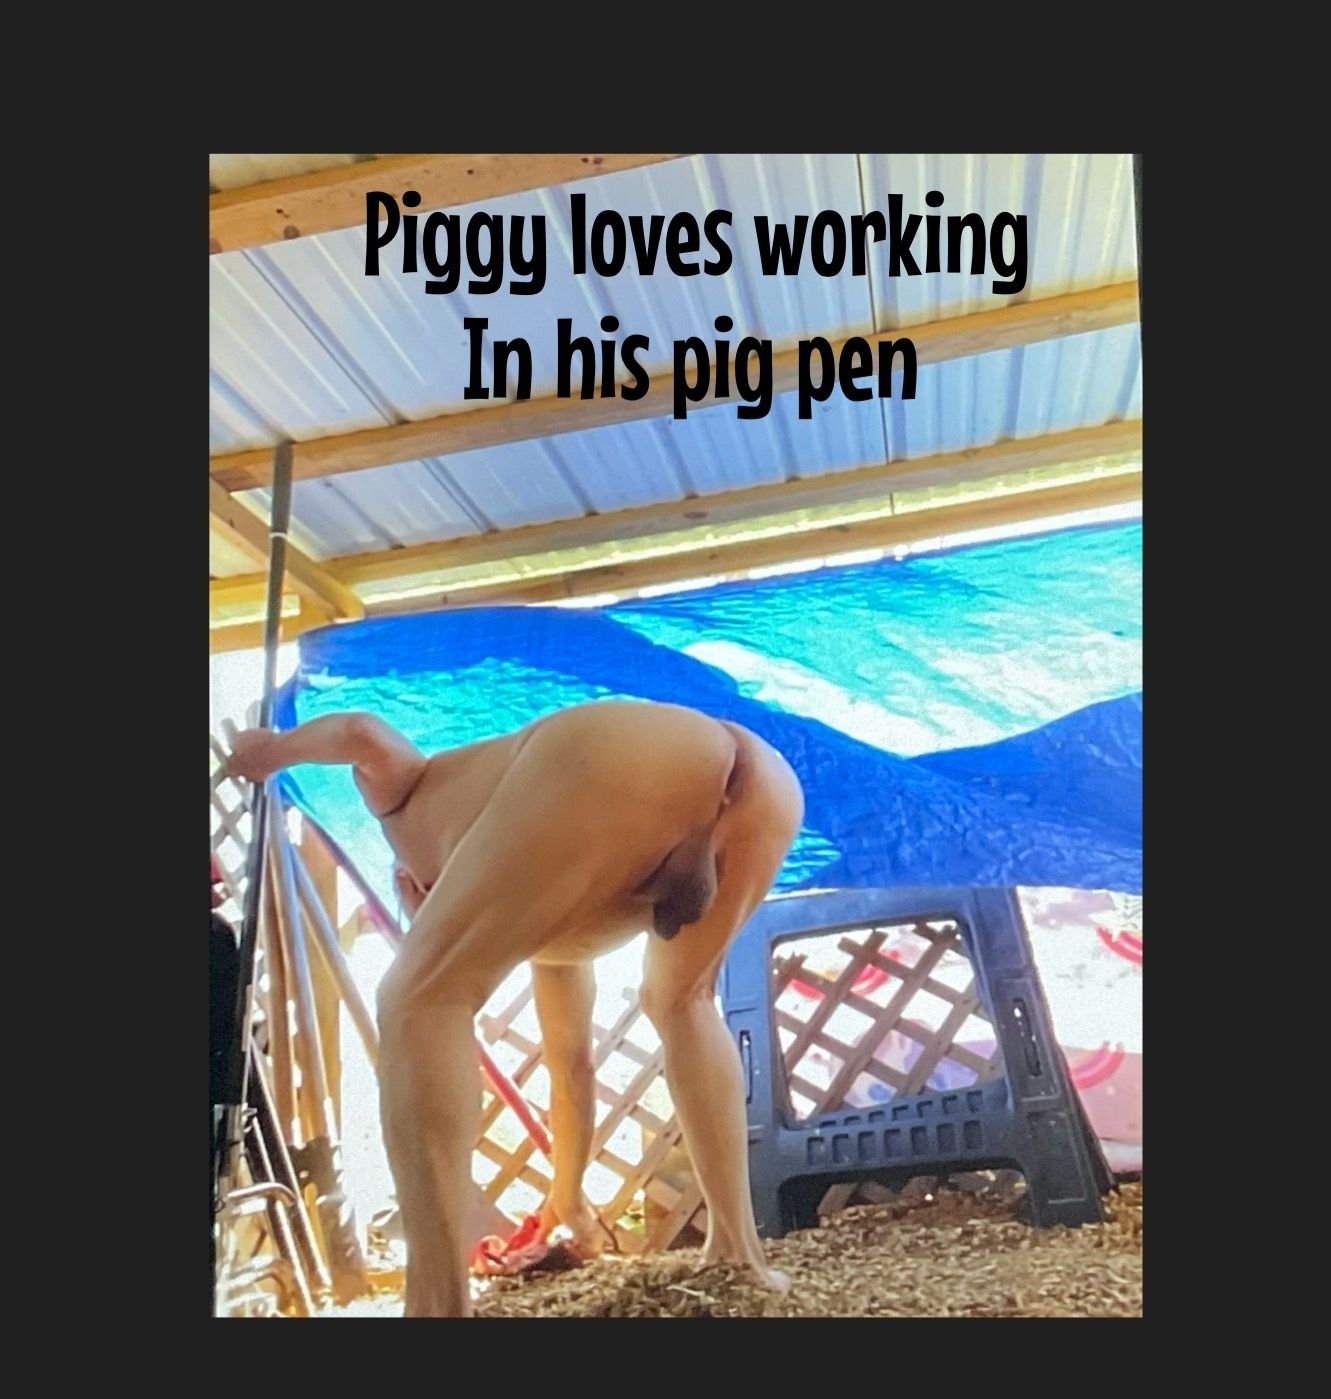 The pig working in his pig pen